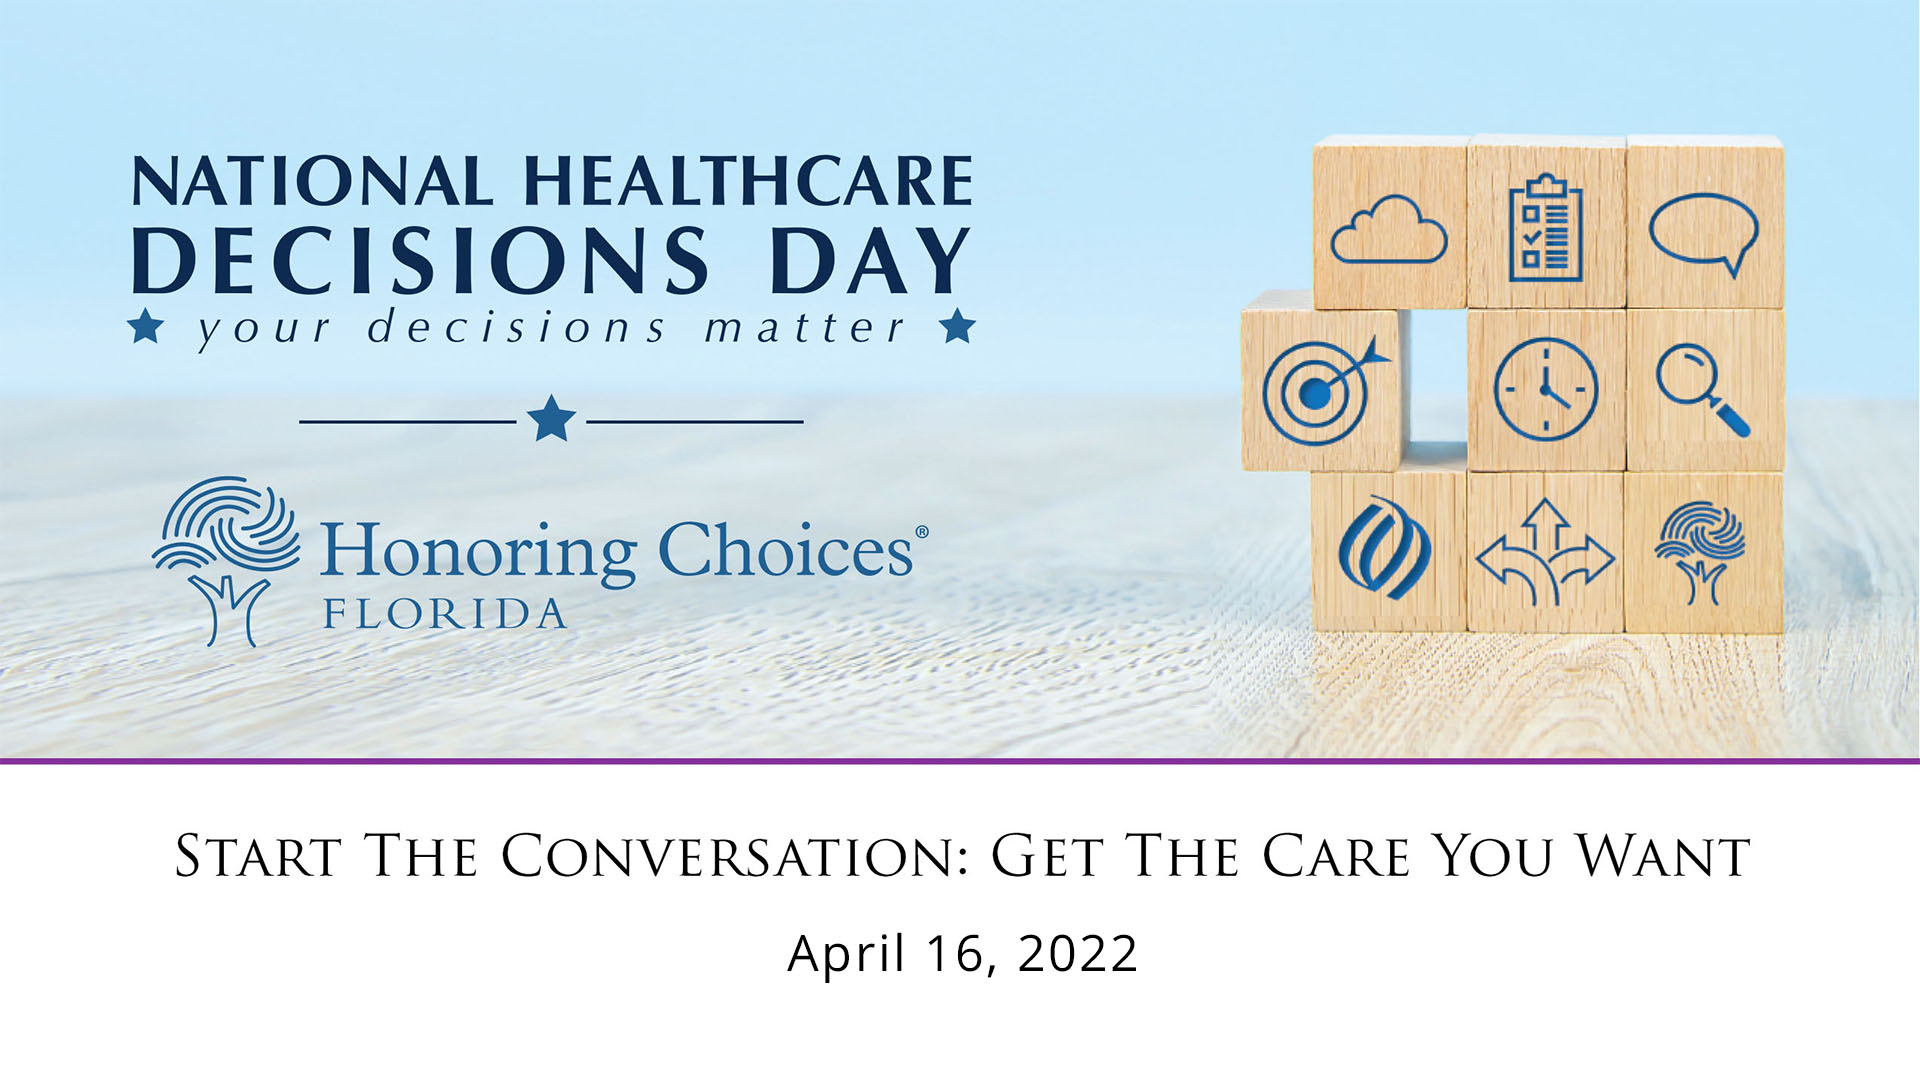 National Healthcare Decisions Day 2022